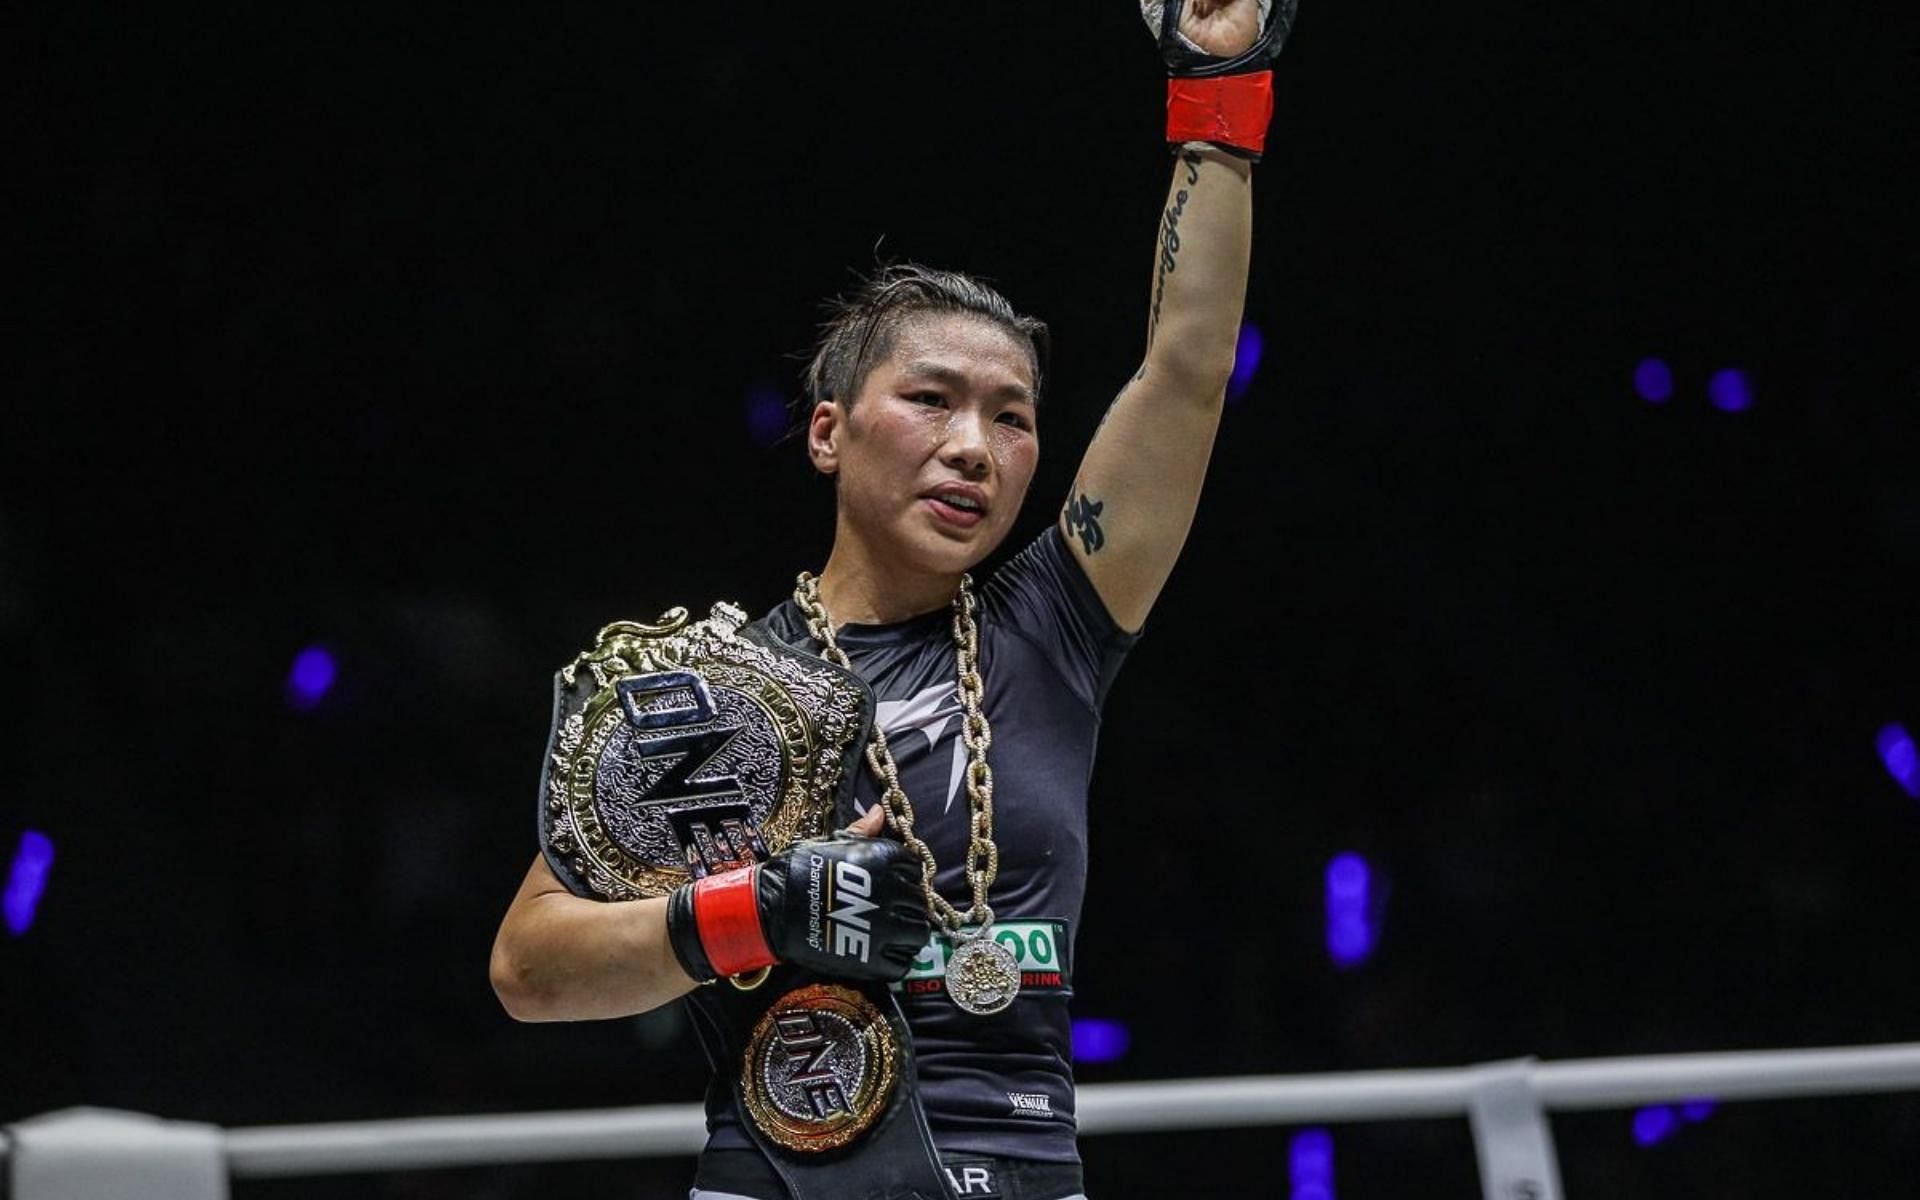 ONE Championship strawweight world champion Xiong Jingnan is one of the best Chinese MMA fighters active today. (Image courtesy of ONE Championship)